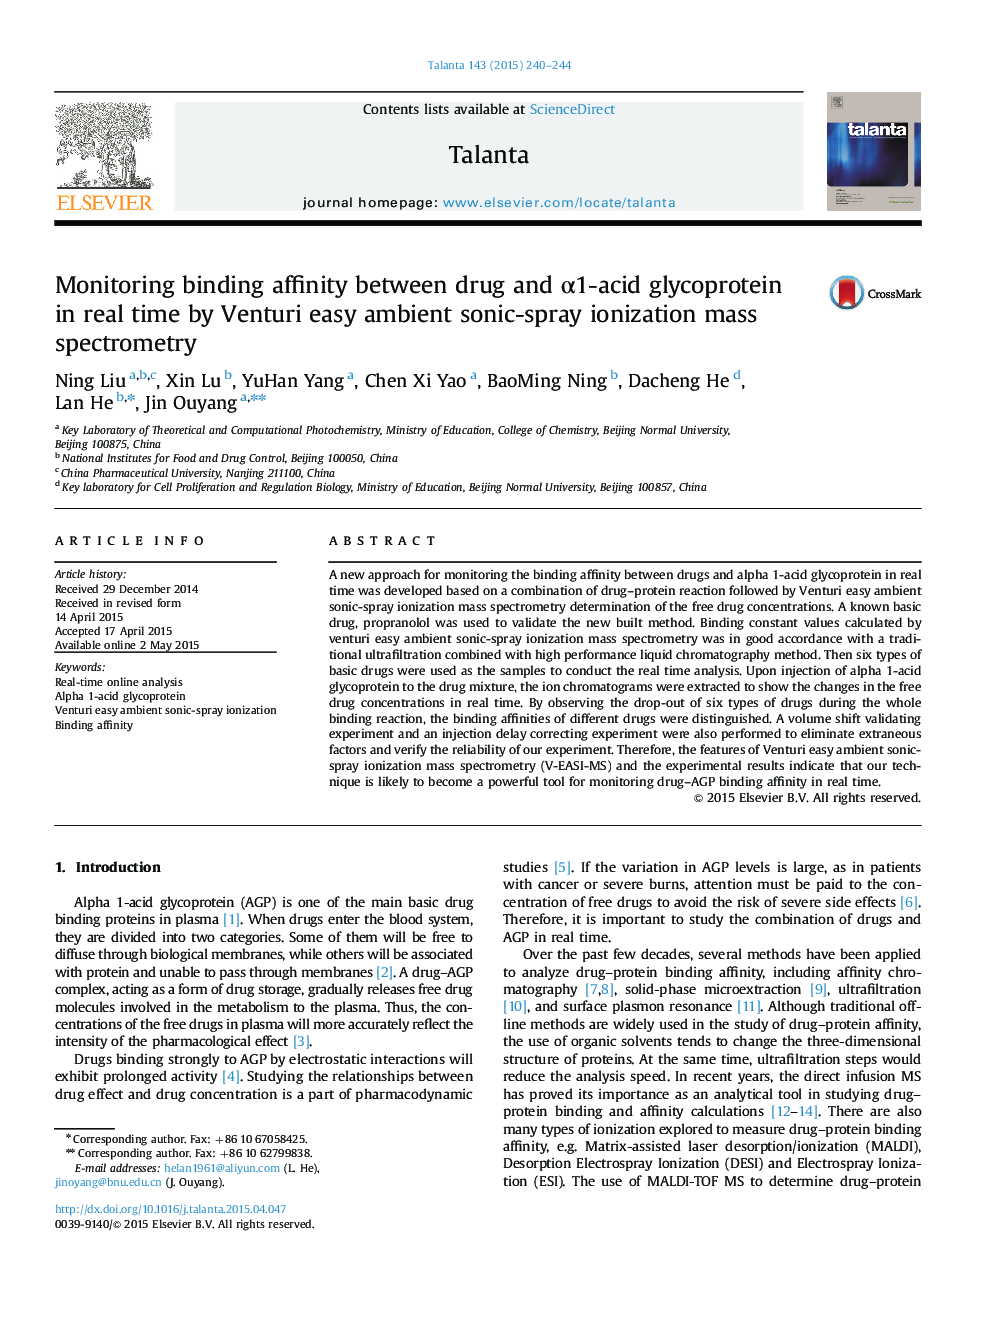 Monitoring binding affinity between drug and α1-acid glycoprotein in real time by Venturi easy ambient sonic-spray ionization mass spectrometry